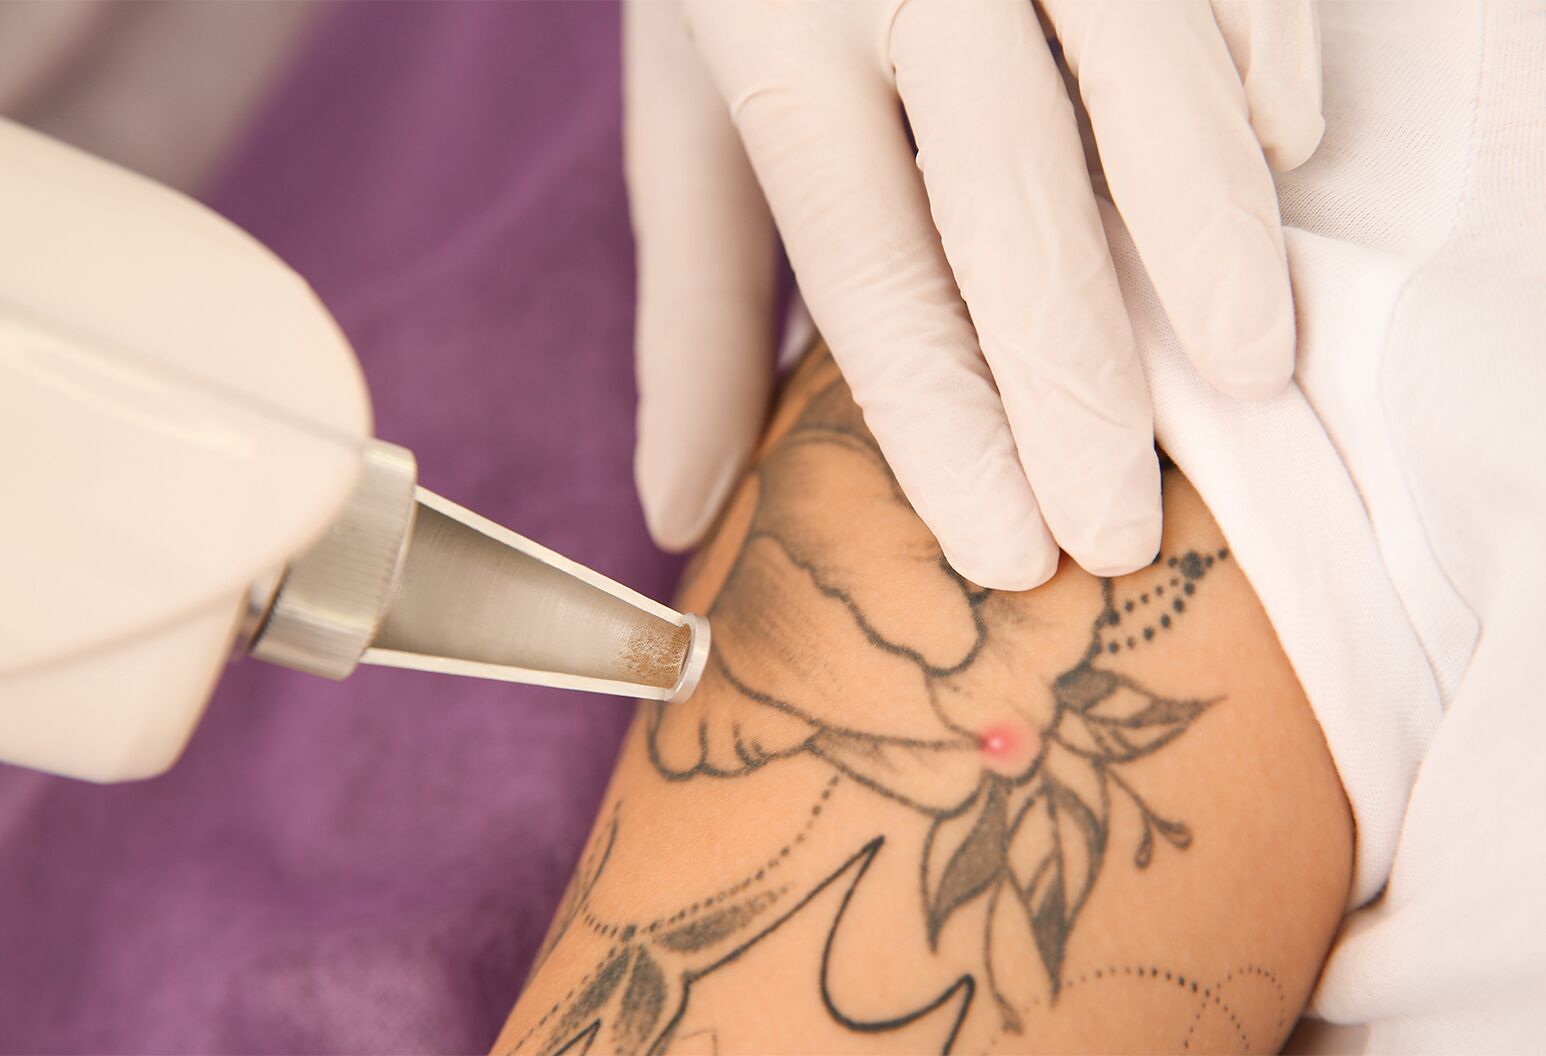 Microneedling Tattoo Removal - Fade Away Laser